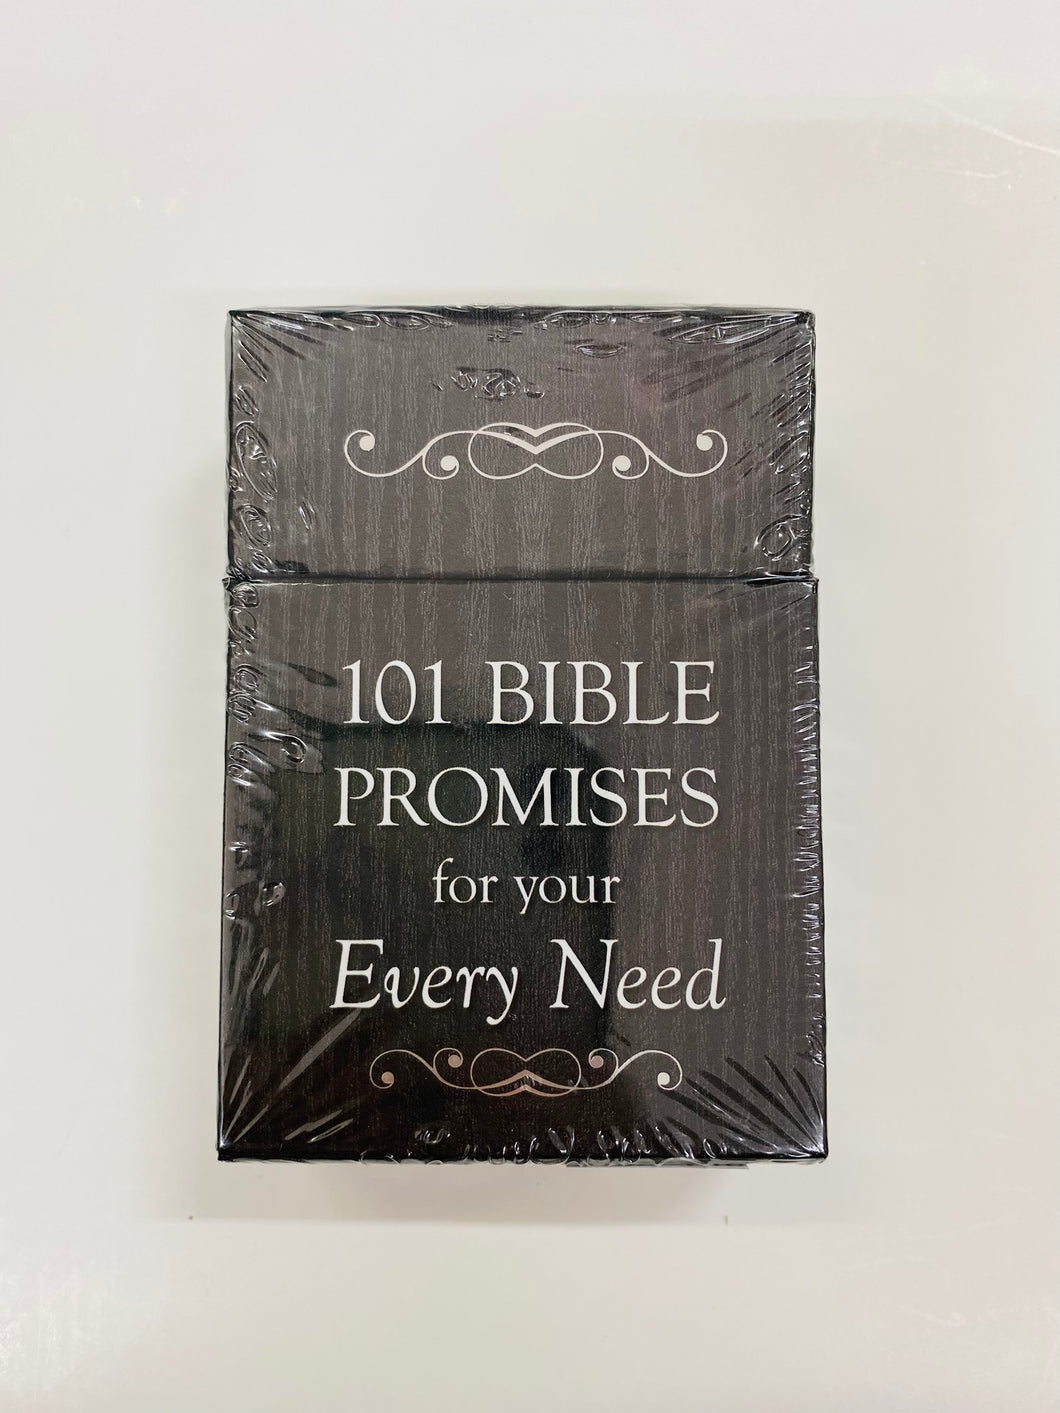 Inspirational Wallet Cards: 101 Bible Promises for your Every Need